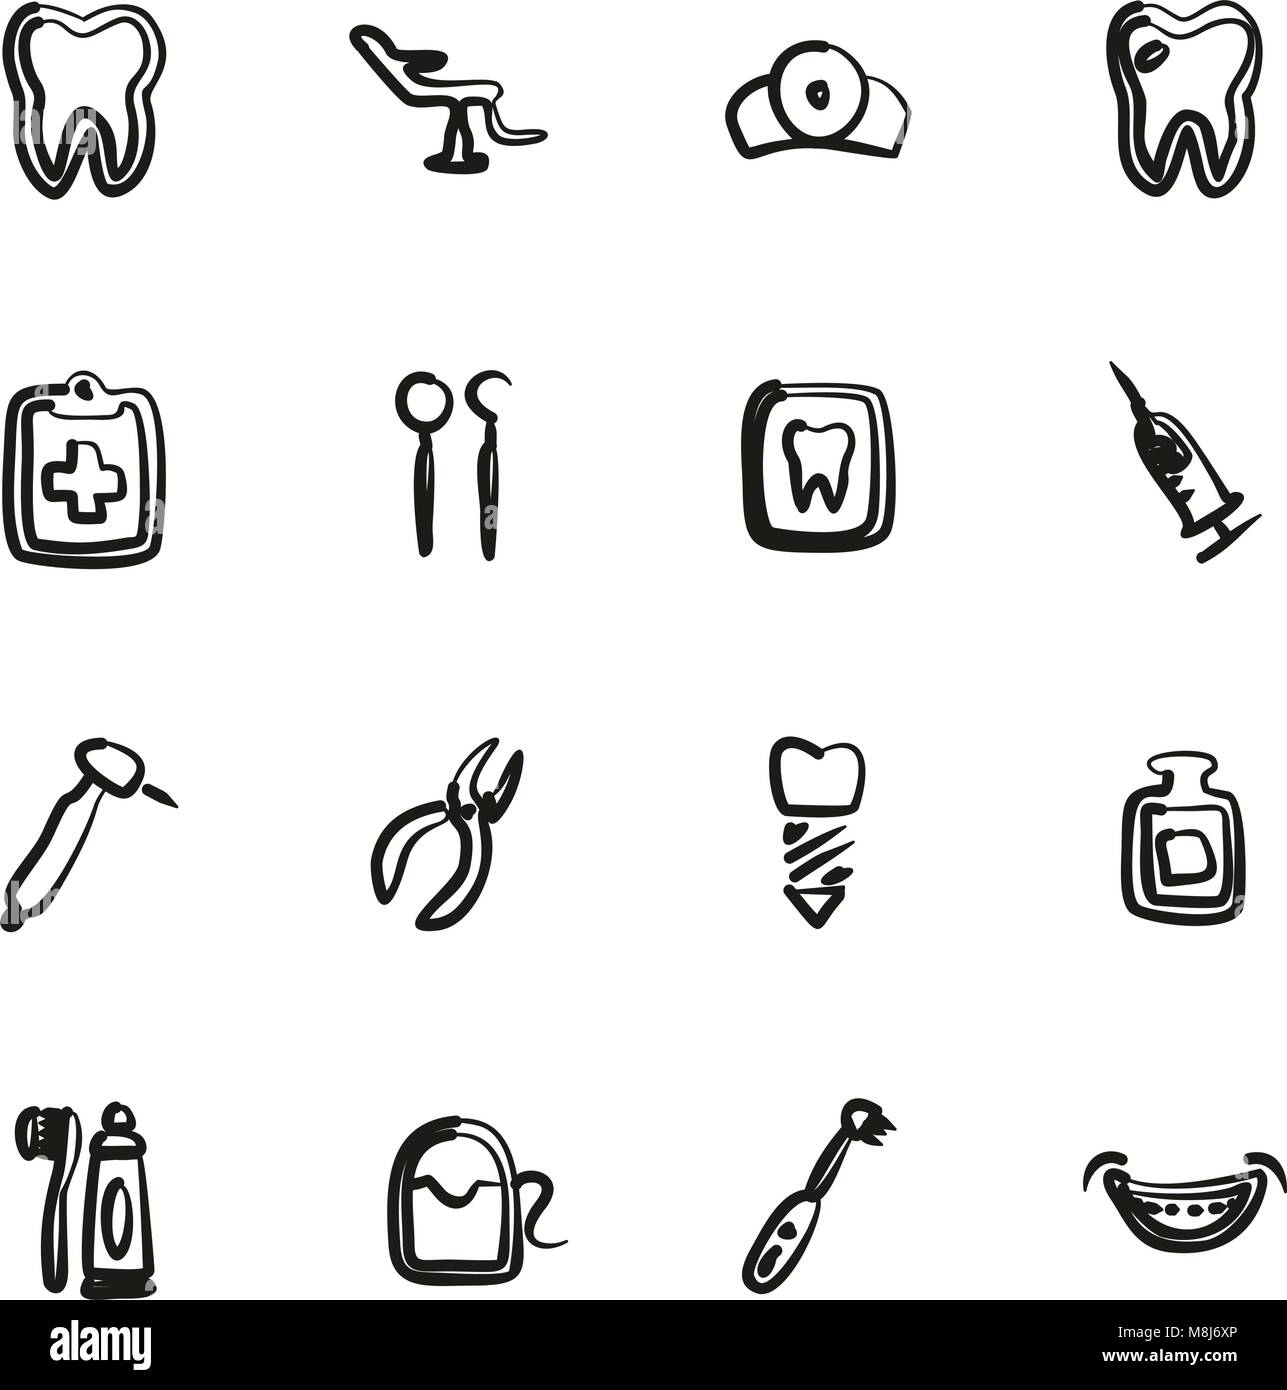 Dentist Icons Freehand Stock Vector